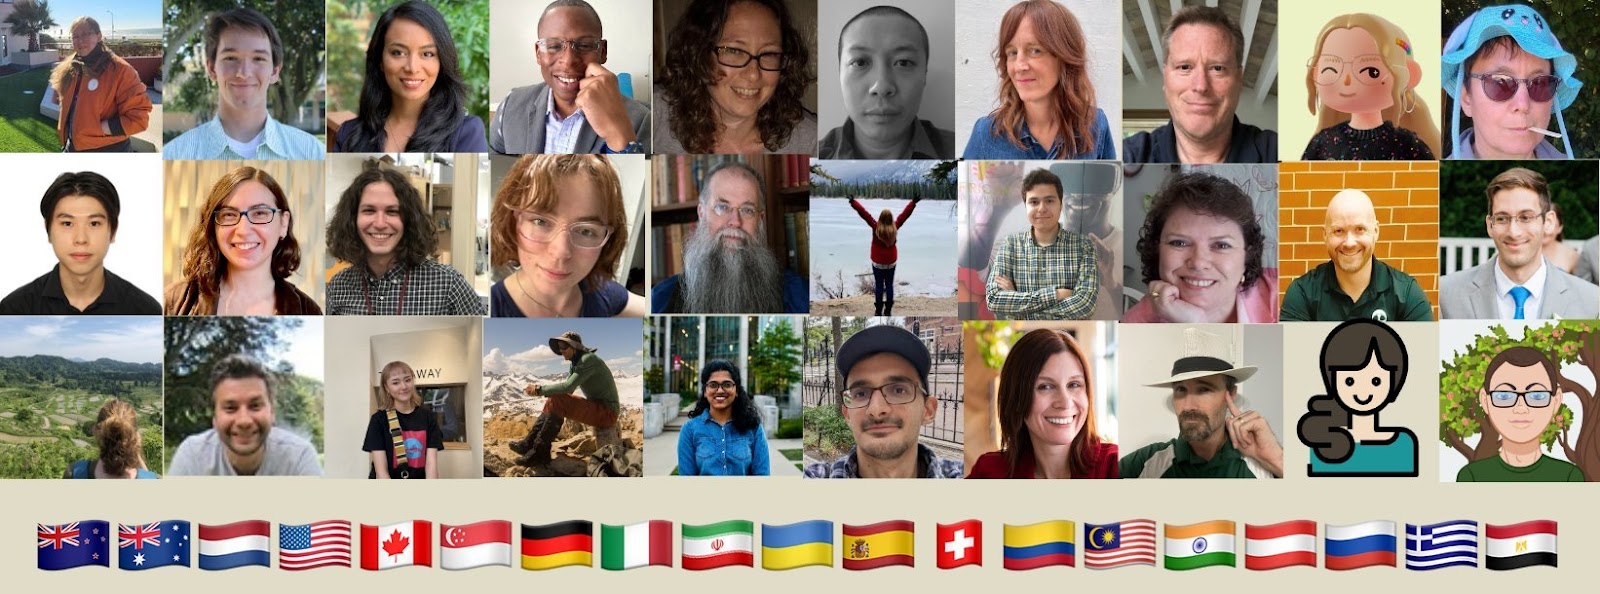 A Snapshot of Open Library contributors representing 15+ Nations